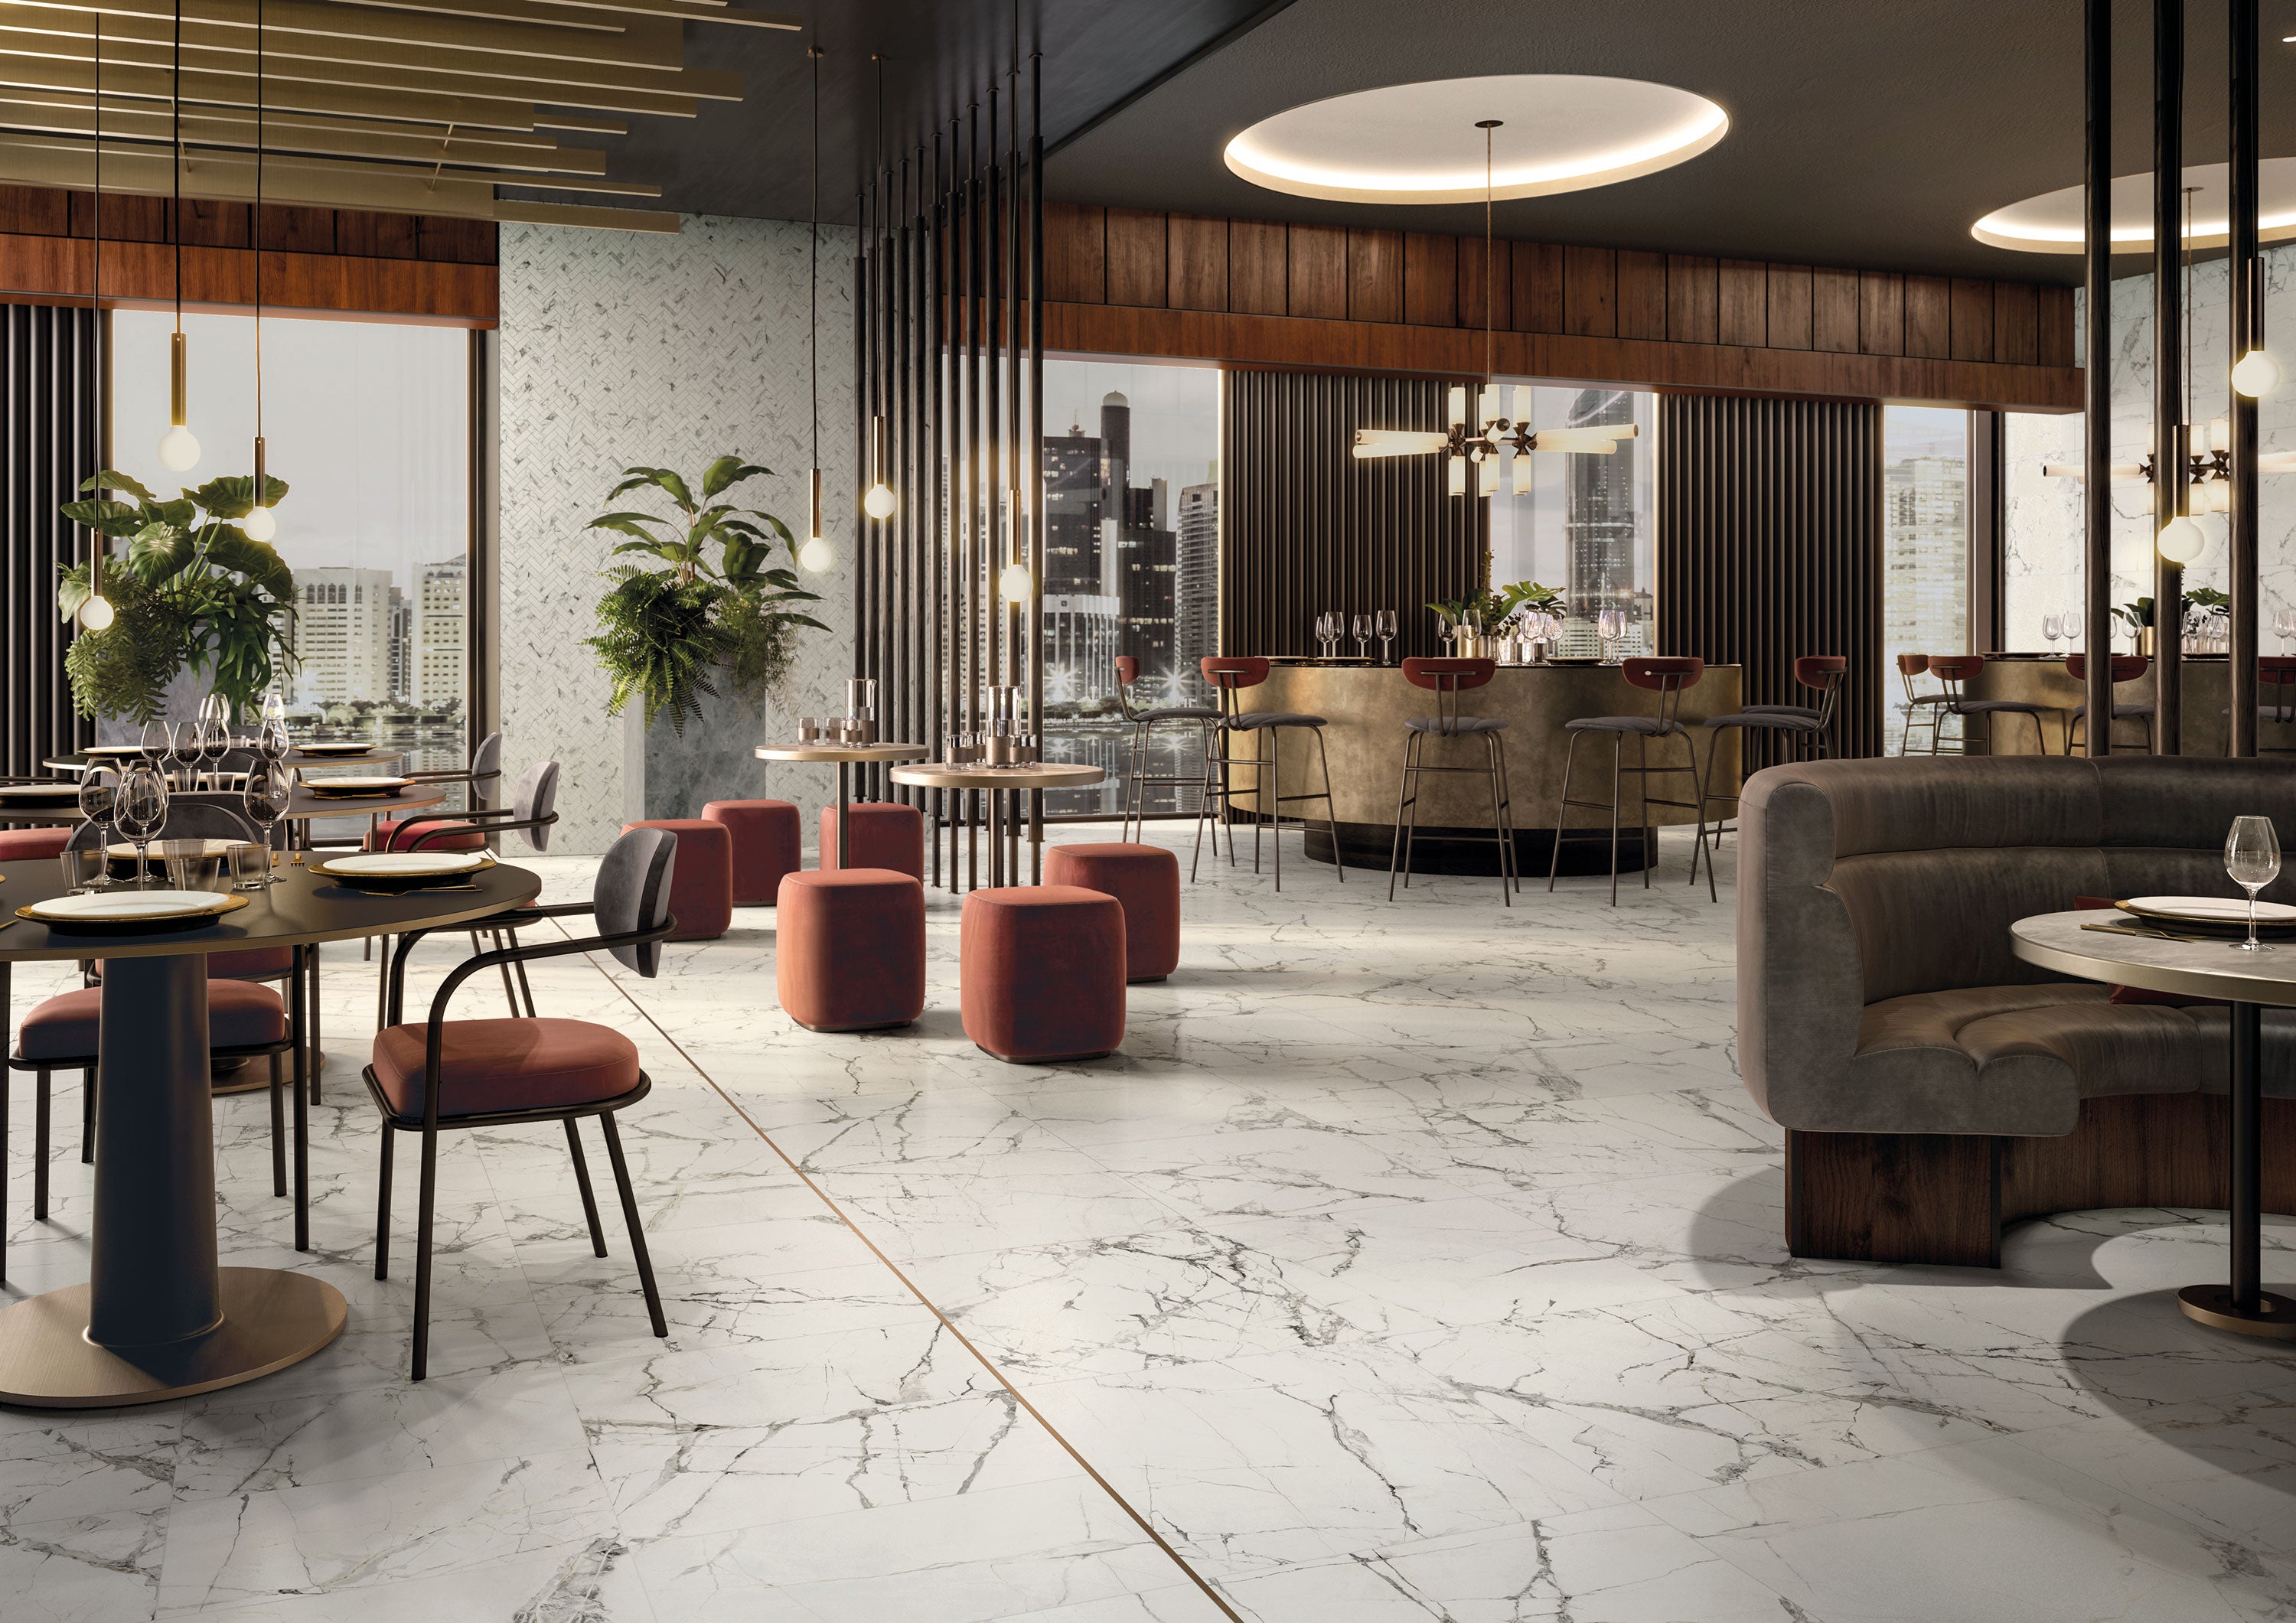 Luxurious Charme Evo porcelain tile collection by Surface Group showcased in a modern restaurant interior with marble effect, elegant furniture, and cityscape view.